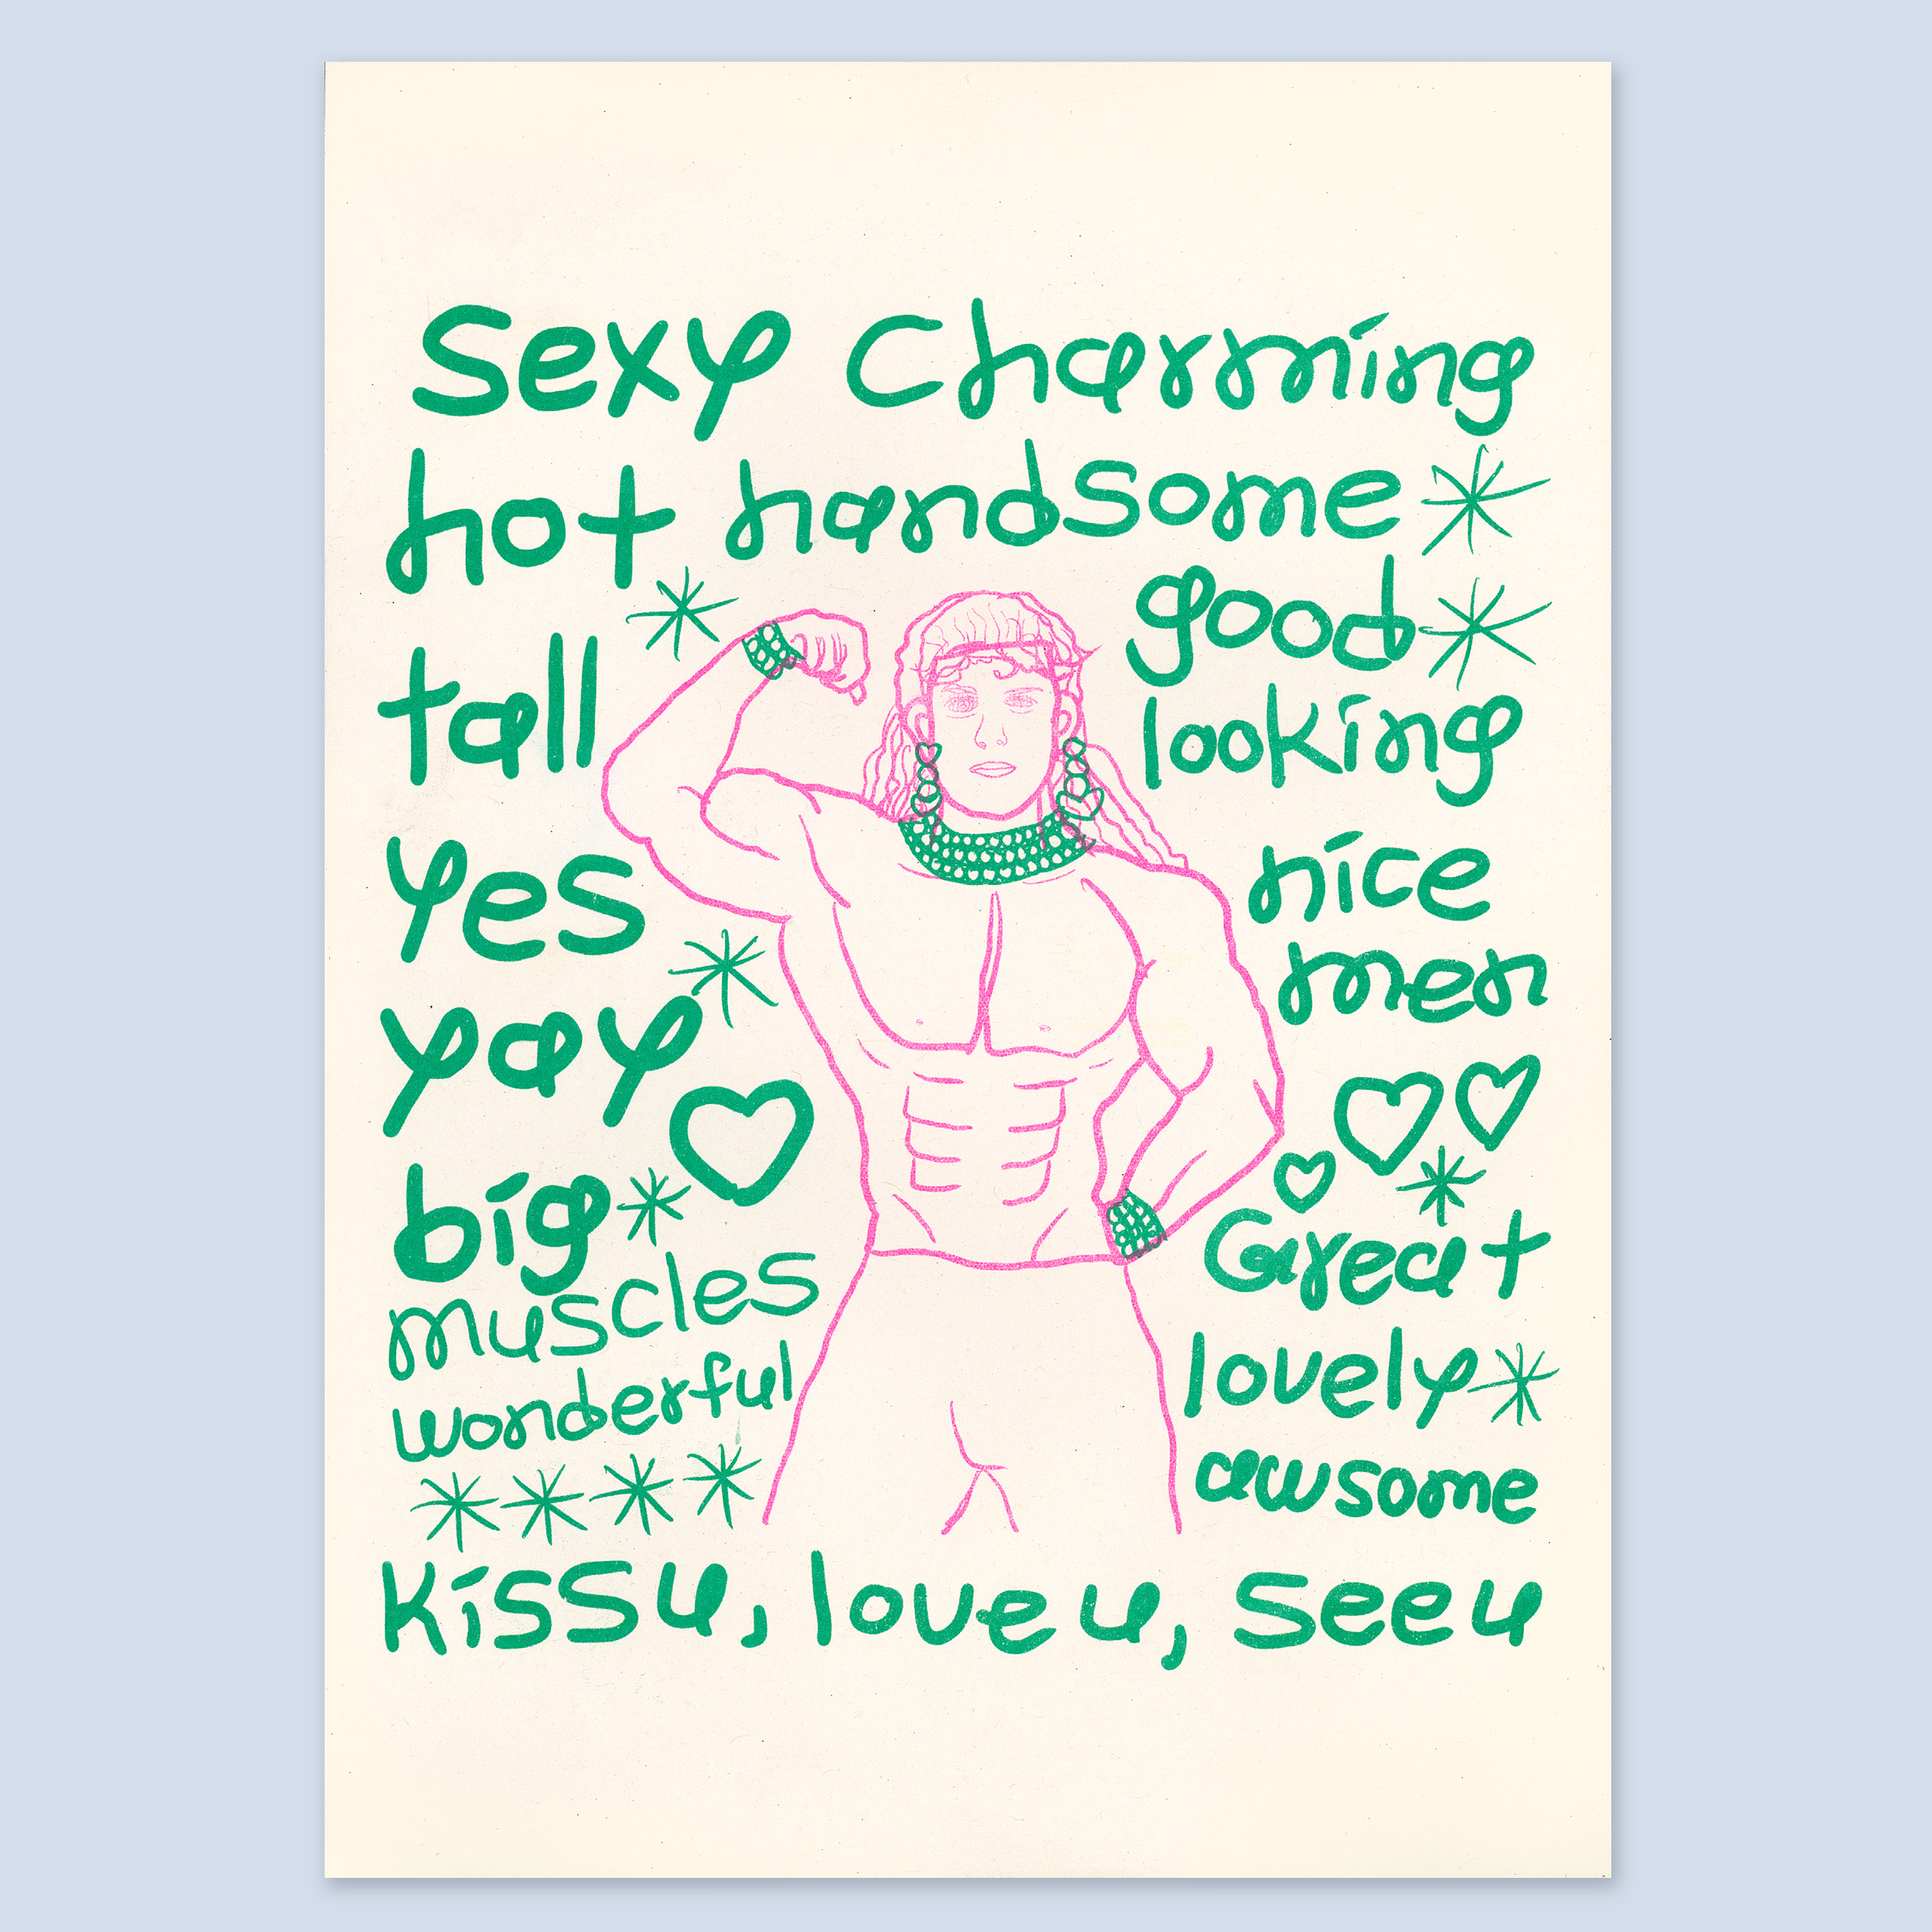 The image depicts an illustration of a pink, sexy, muscle man flexing their biceps. They are surrounded by seafoam green sparkles and lettering describing how handsome he is. The lettering reads “sexy, charming, hot, handsome, tall, yes yay, big muscles, wonderful, good looking, nice men, great, lovely, awesome, kiss u, love u, see u”.